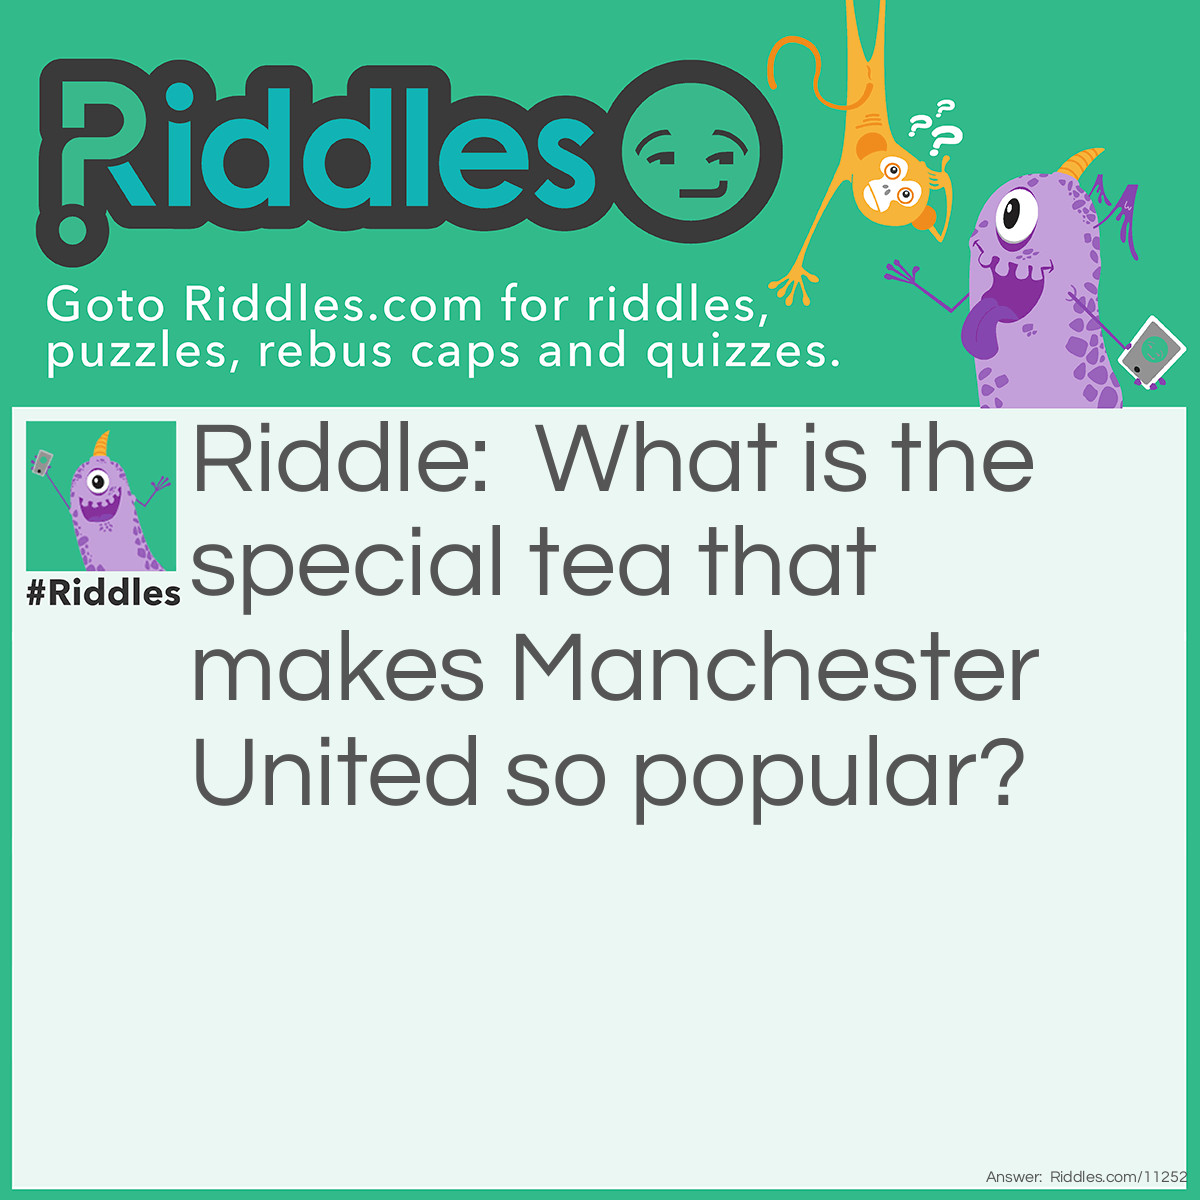 Riddle: What is the special tea that makes Manchester United so popular? Answer: Unity.